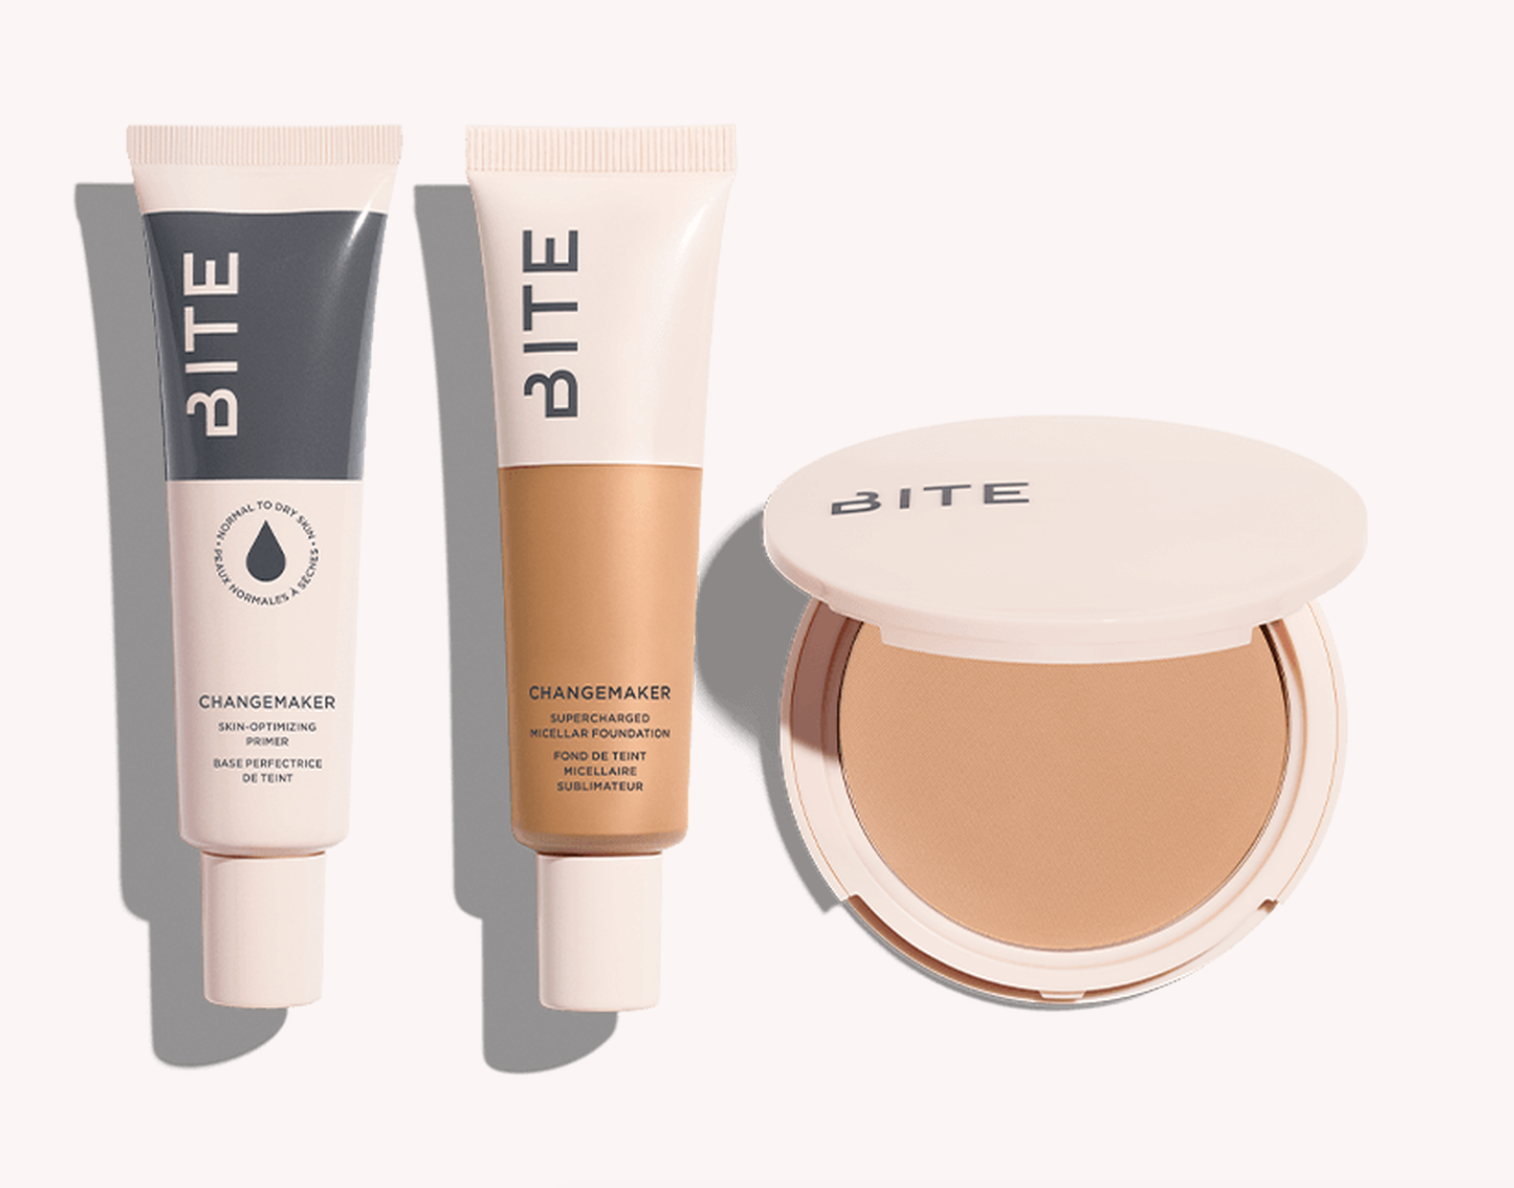 January’s Top Beauty Brands: Makeup Geek Rebrands, Bite Beauty Launches Complexion Products